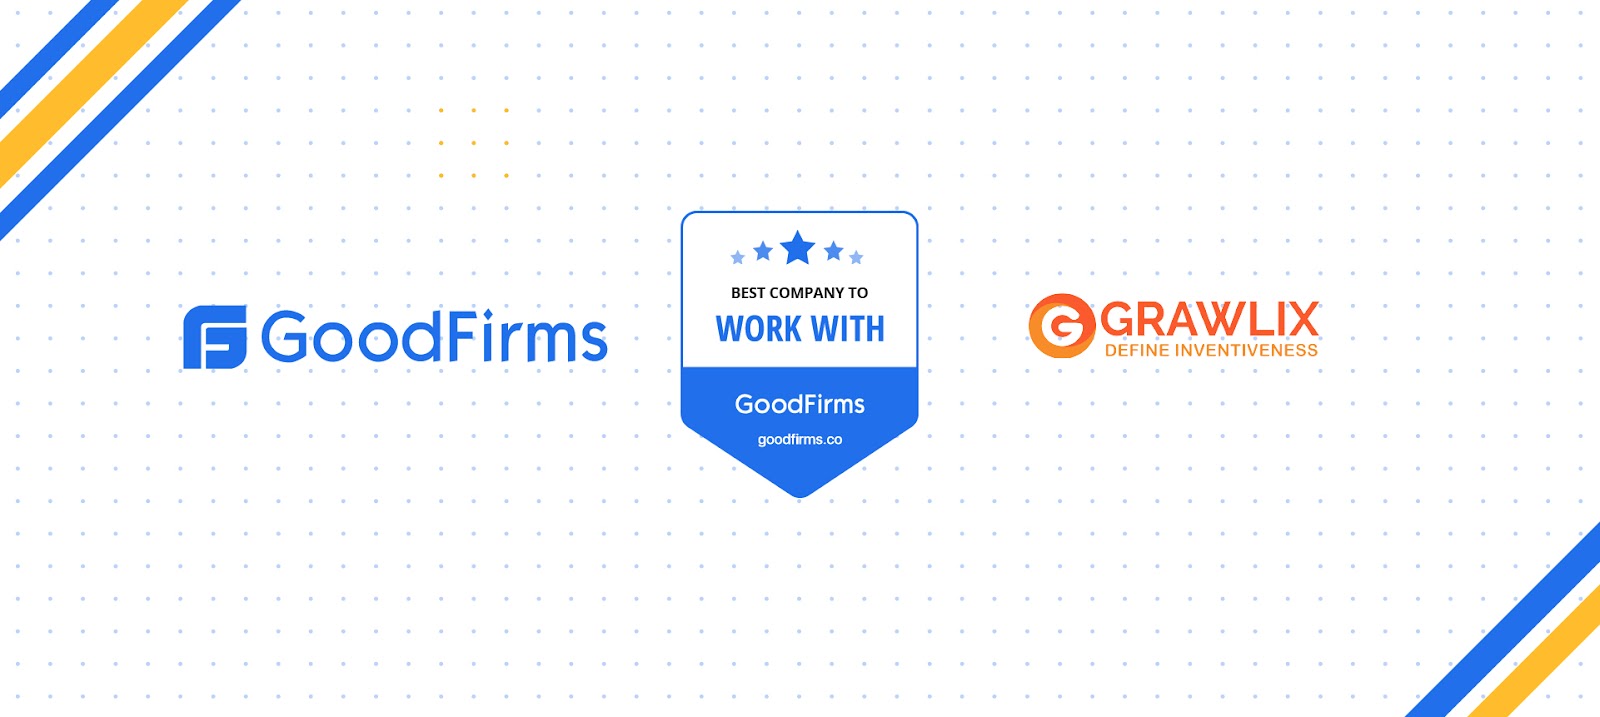 GoodFirms Recognizes Grawlix as the Best Company to Work With